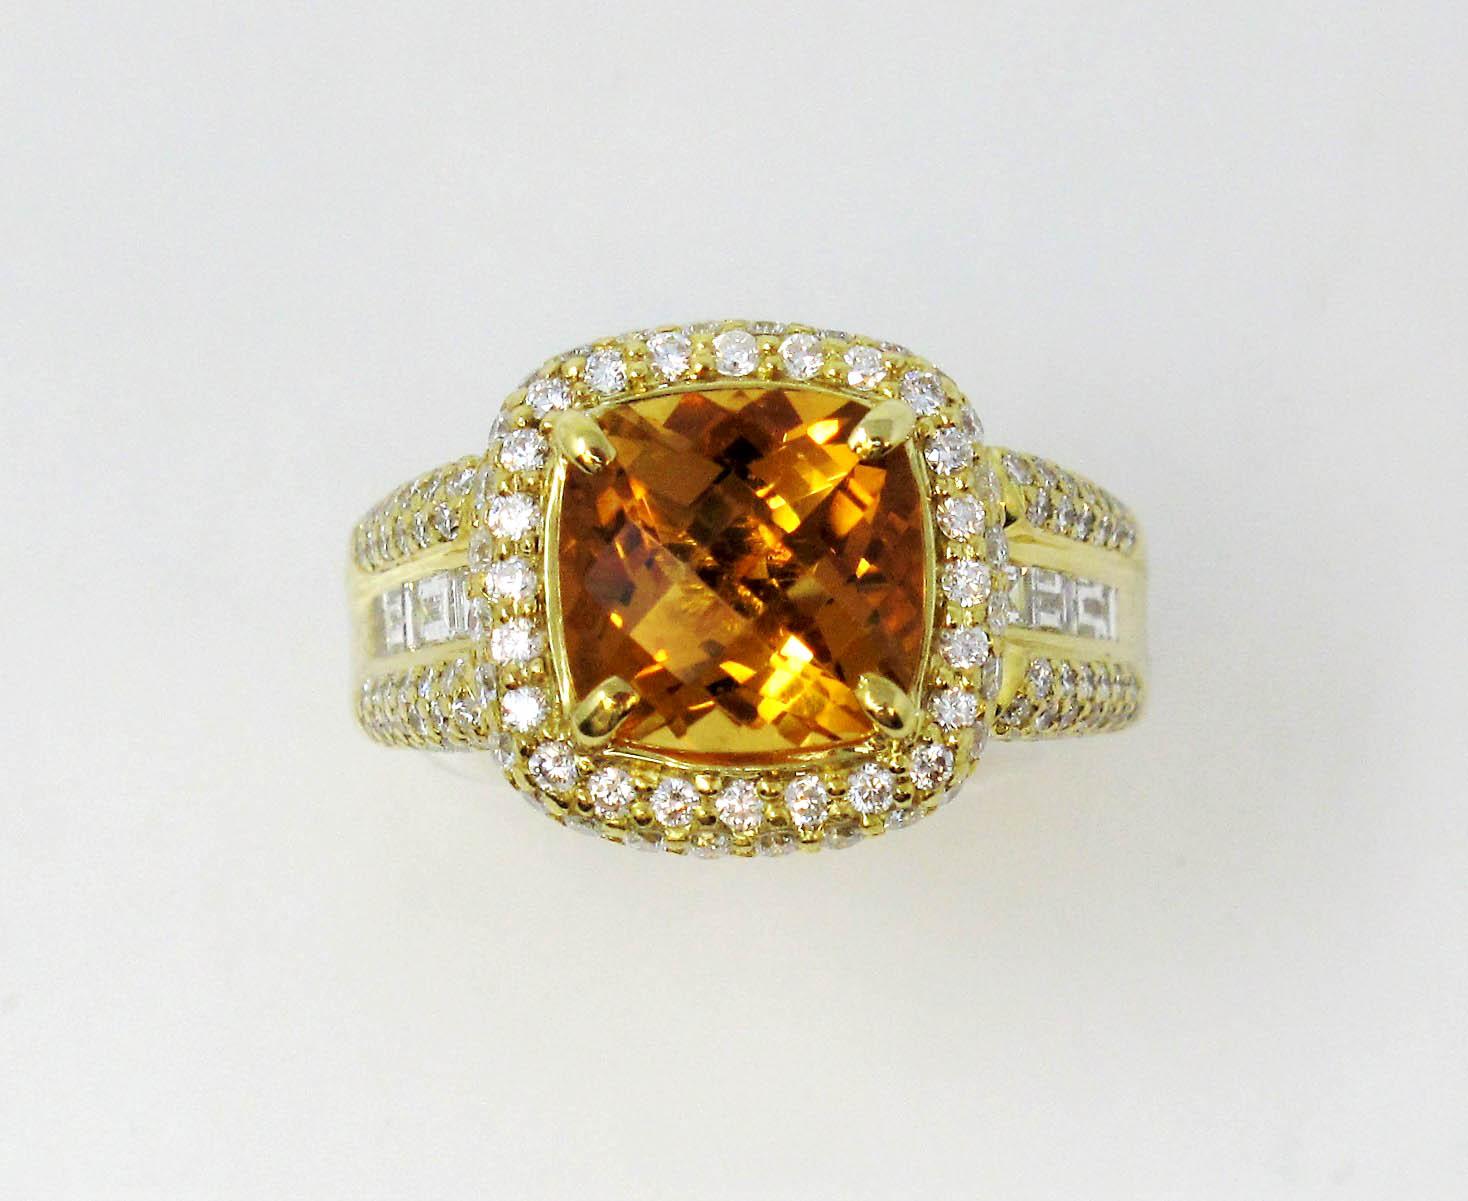 Ring size 7.5

Breathtaking citrine and diamond halo cocktail ring designed by Charles Krypell. This bold yet feminine ring will absolutely radiate on the finger. The striking orange cushion cut center stone is paired with a glittering halo of